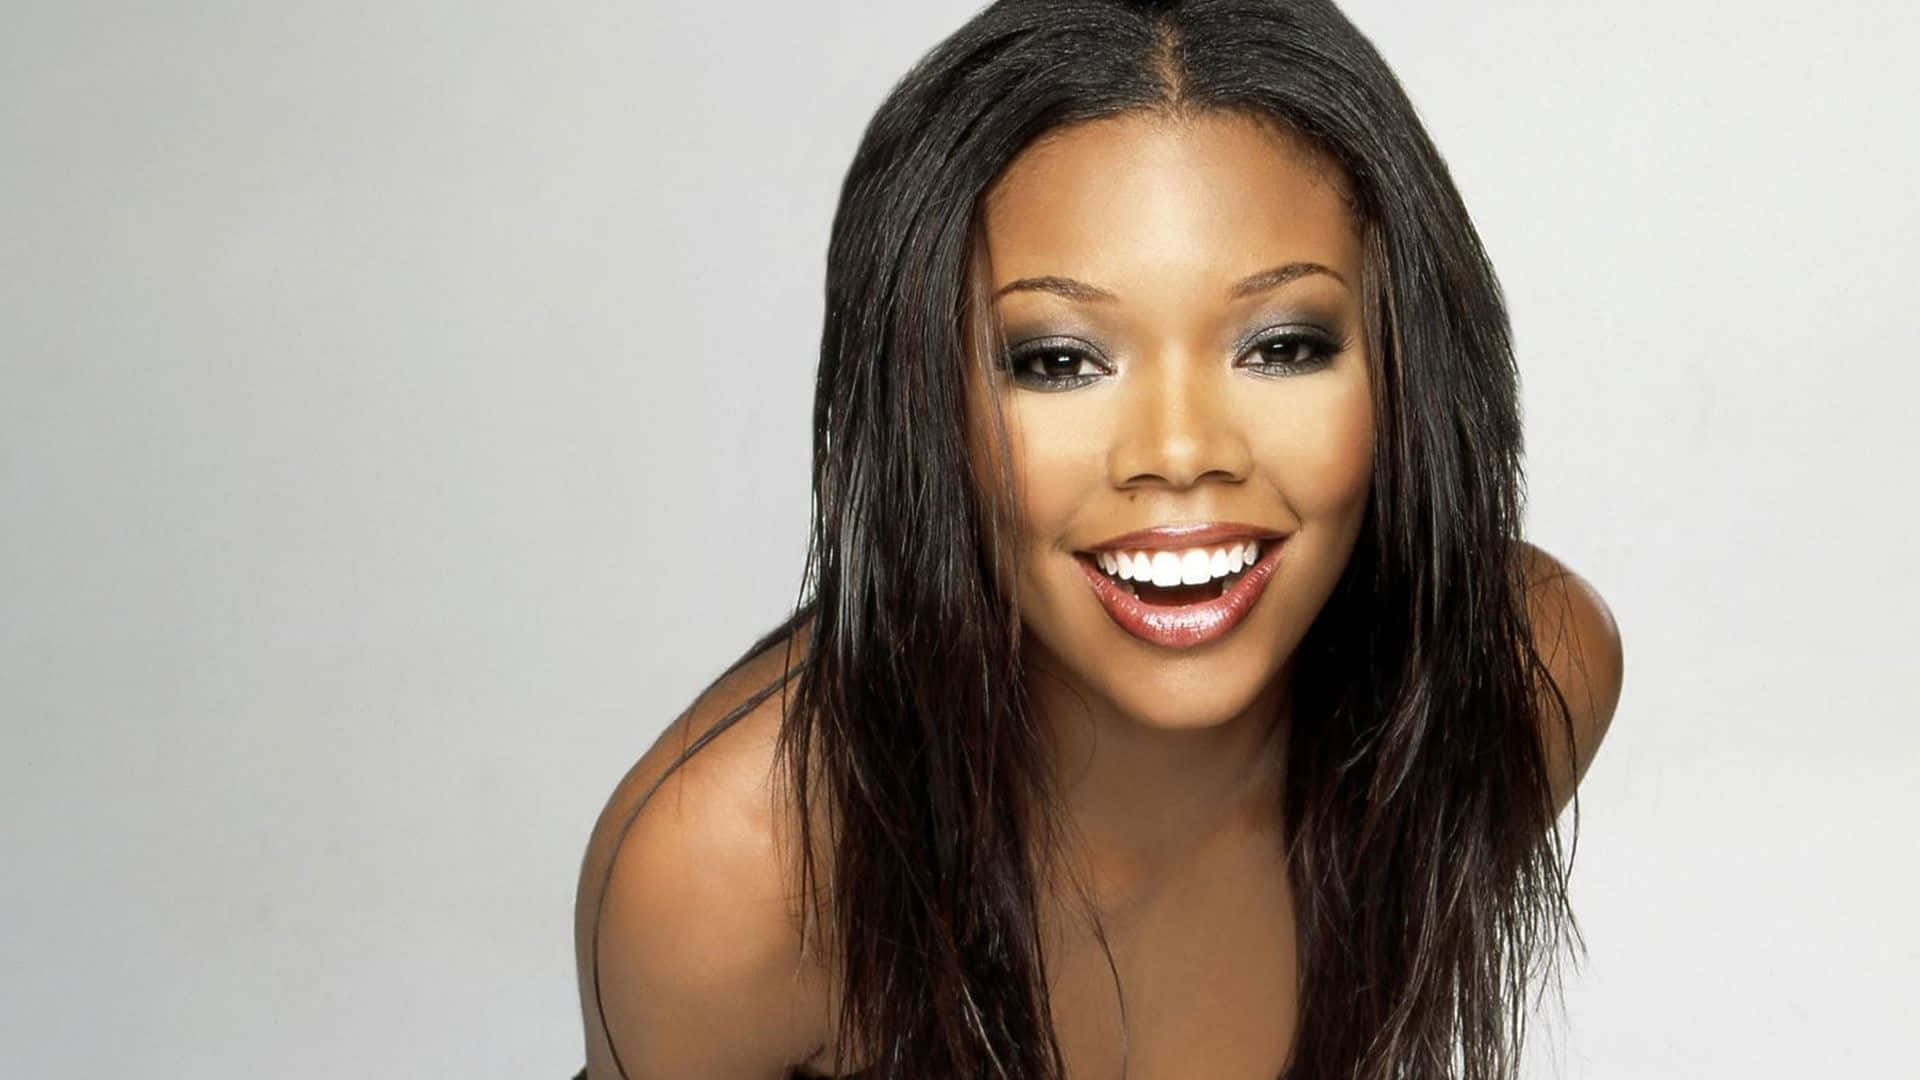 [100+] Gabrielle Union Wallpapers | Wallpapers.com